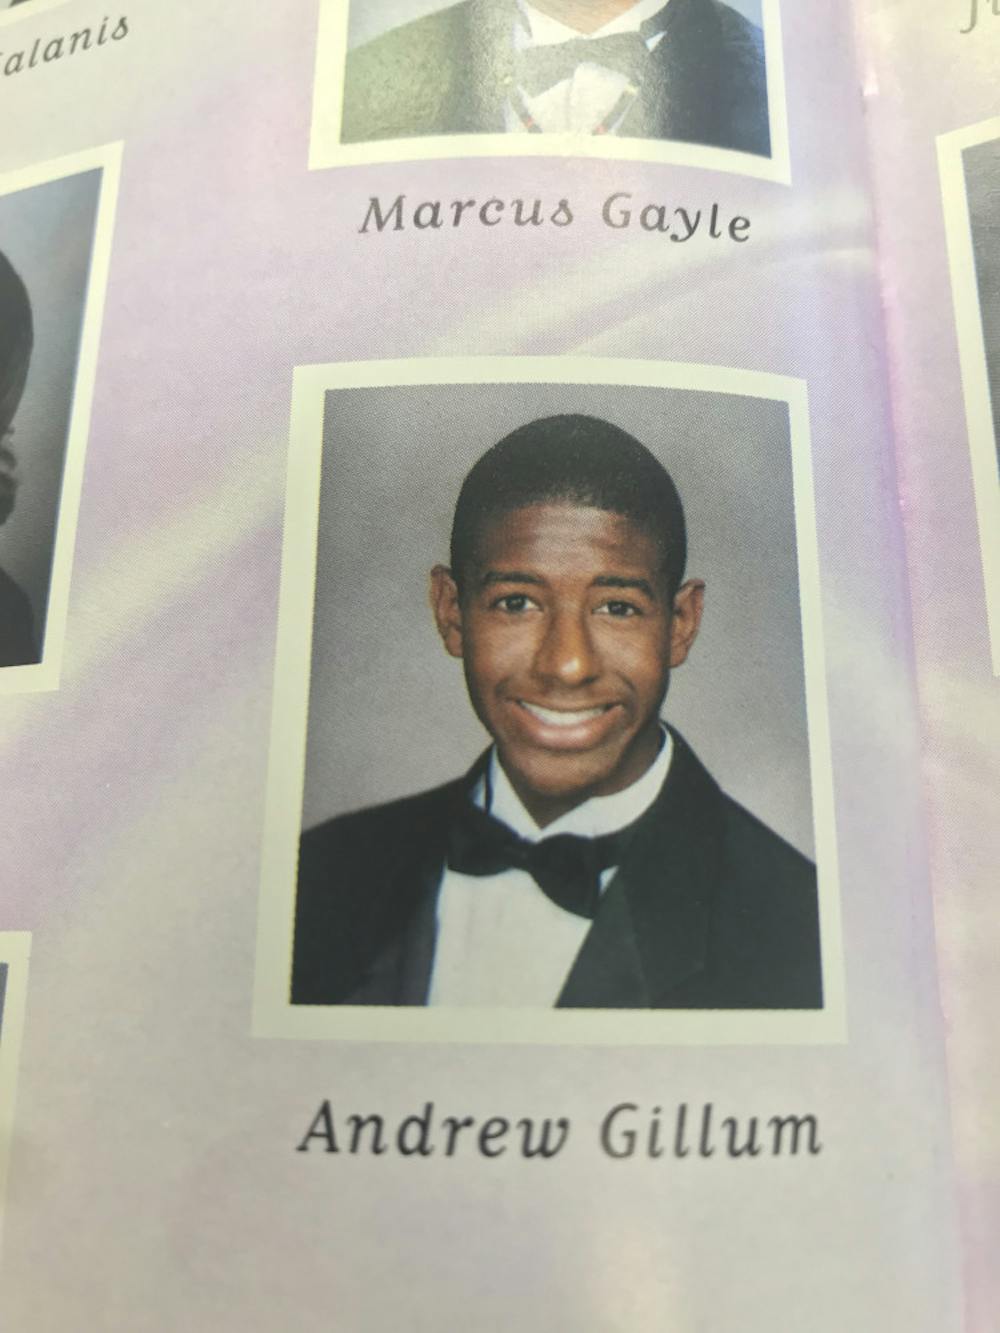 <p><span>Andrew Gillum attended Gainesville High School from 1994 to 1998. Some of his roles included sophomore class president, senior class president and student body vice president. </span></p>